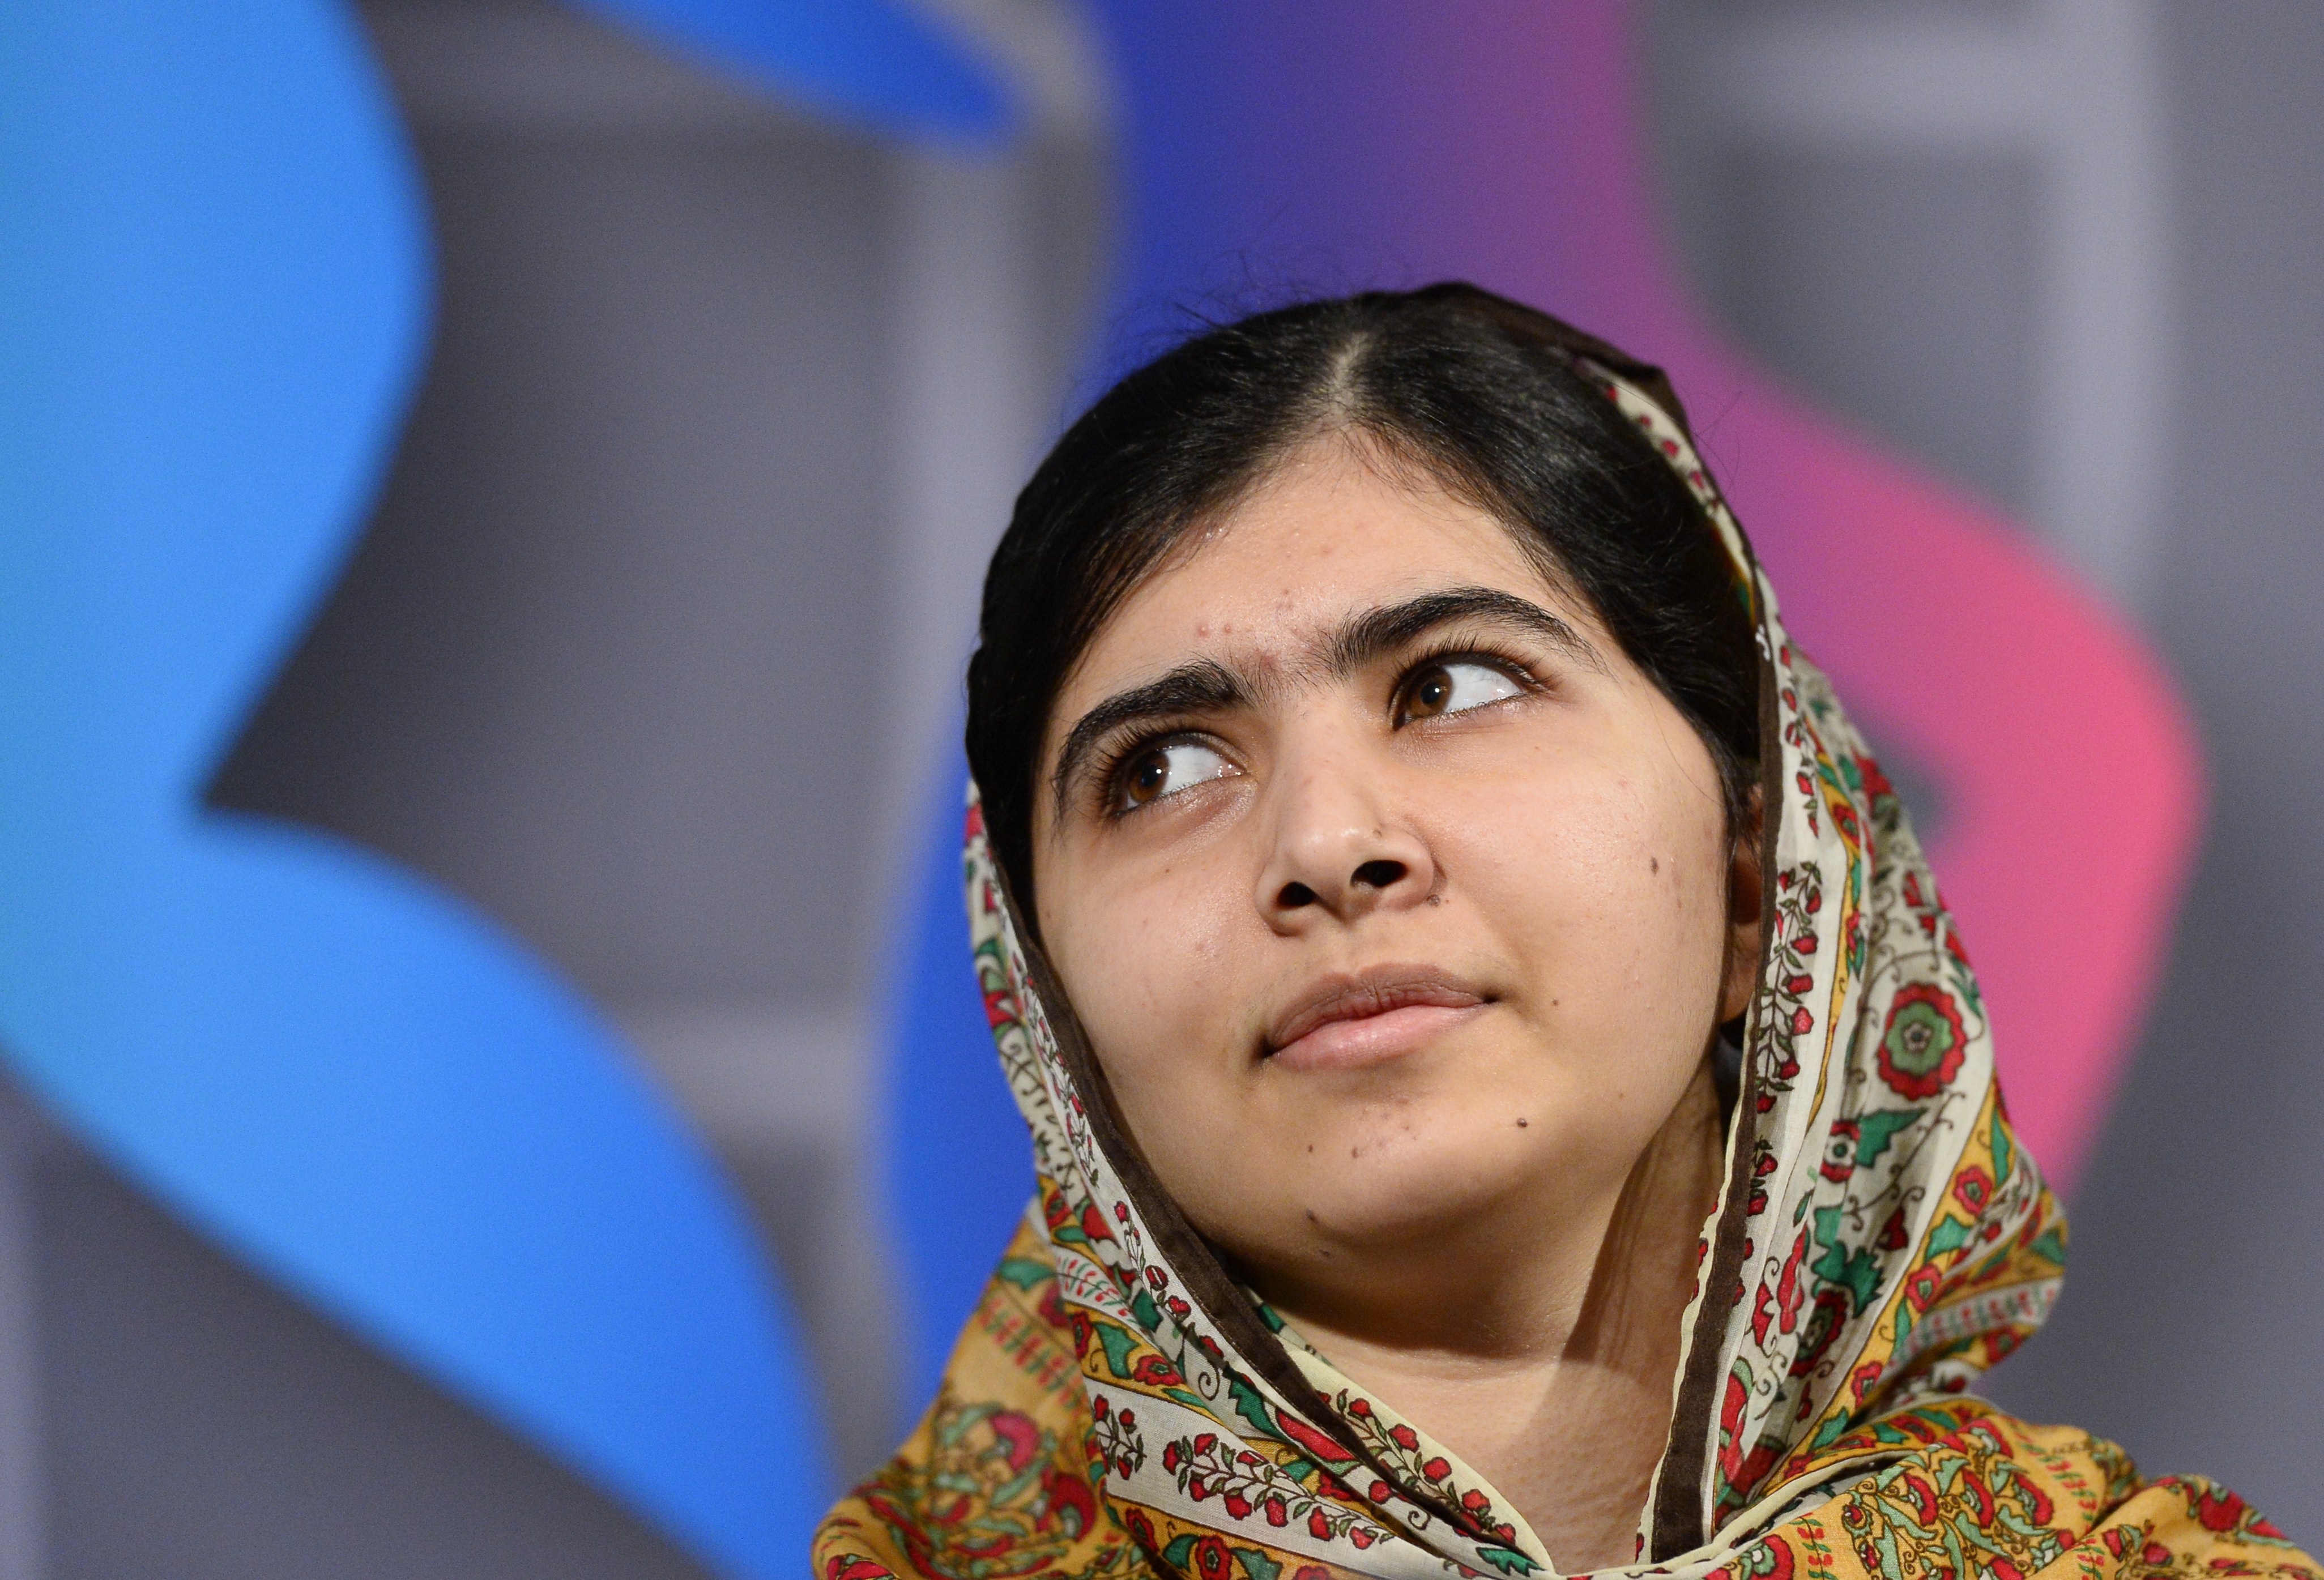 Pakistani activist for female education Malala Yousafzai attends a press conference ahead of the award ceremony for the 2014 World's Children Prize for the Rights of the Child at Gripsholm Castle in Mariefred, Sweden on Oct. 29, 2014. (Jonathan Nackstrand—AFP/Getty Images)